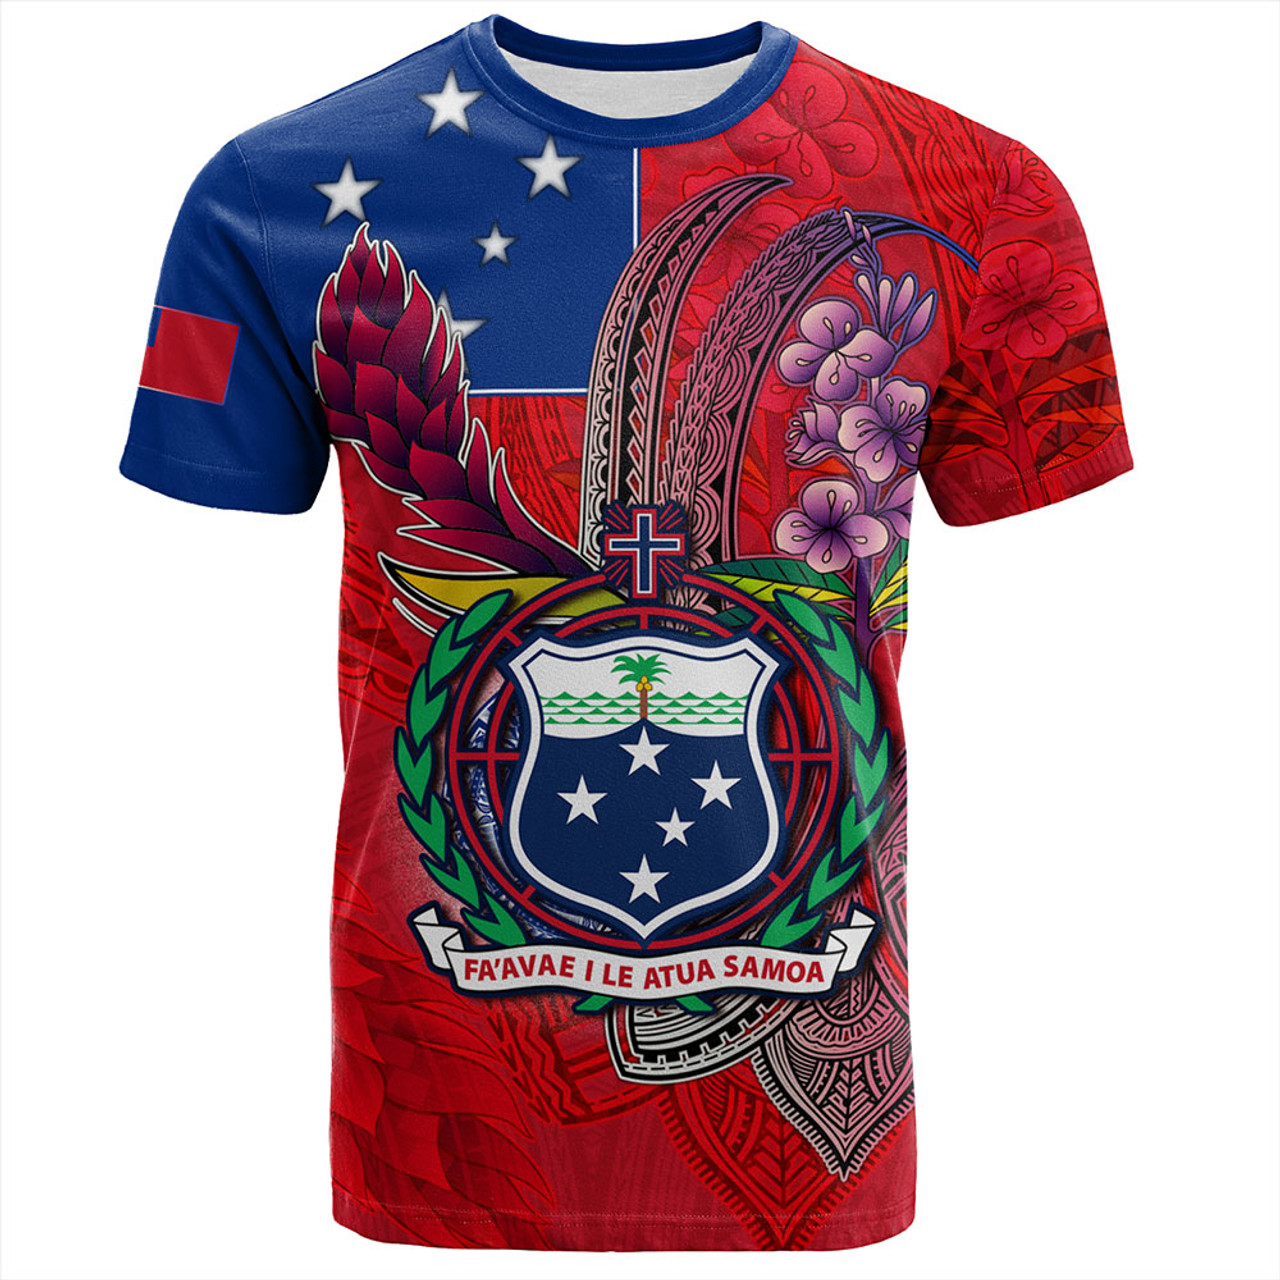 Samoa T-Shirt Samoa Flag With Seal Teuilia Flowers Tradition Patterns